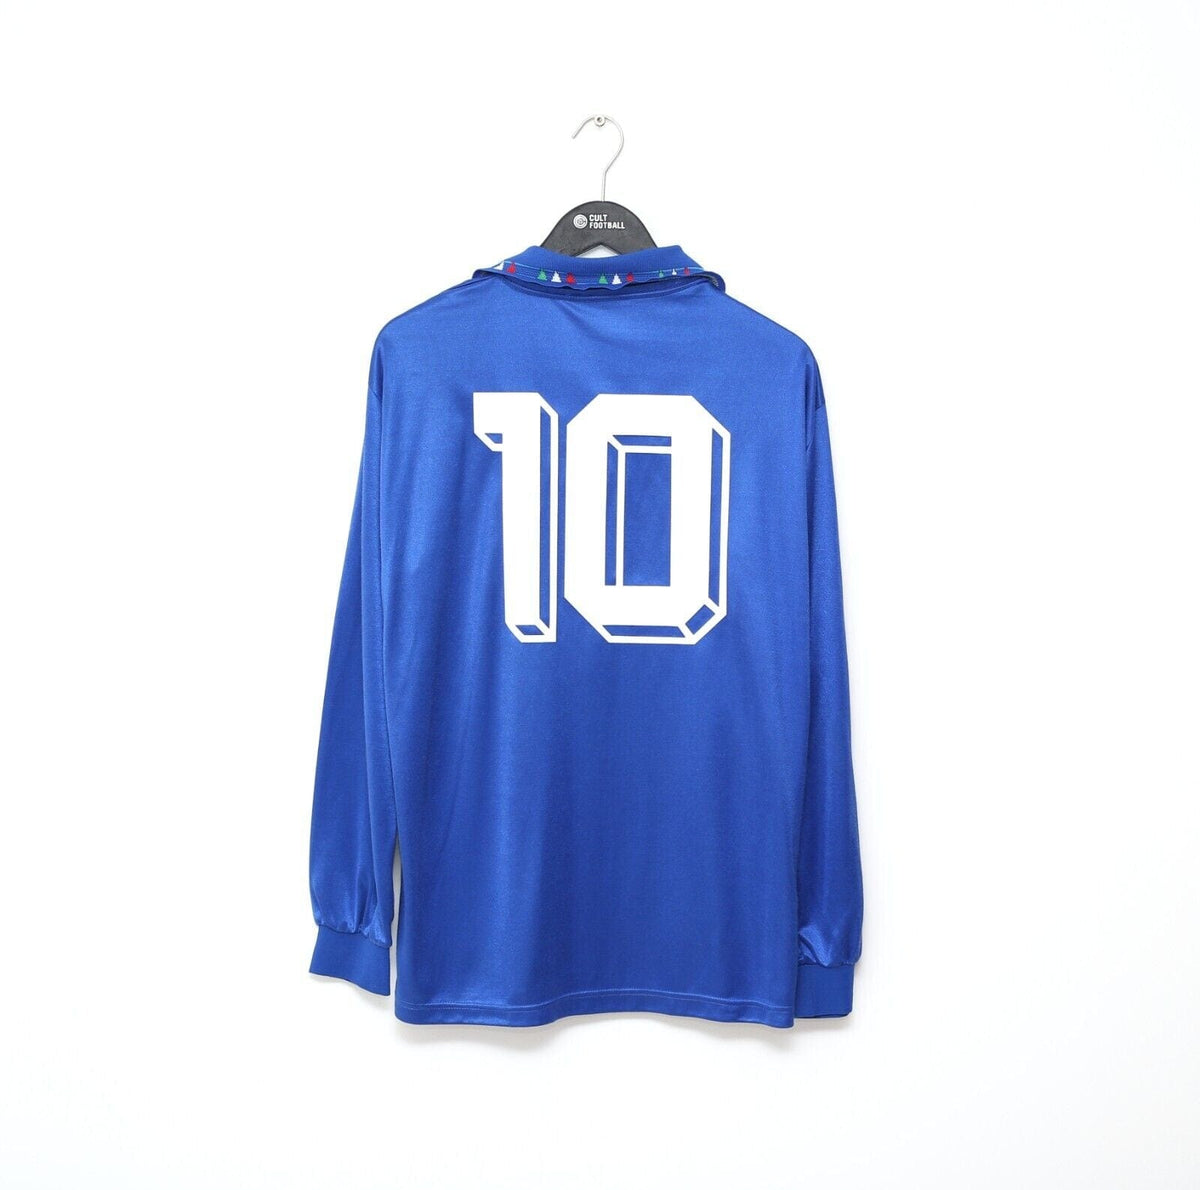 1992-93 Italy *PLAYER ISSUE* home jersey - XL